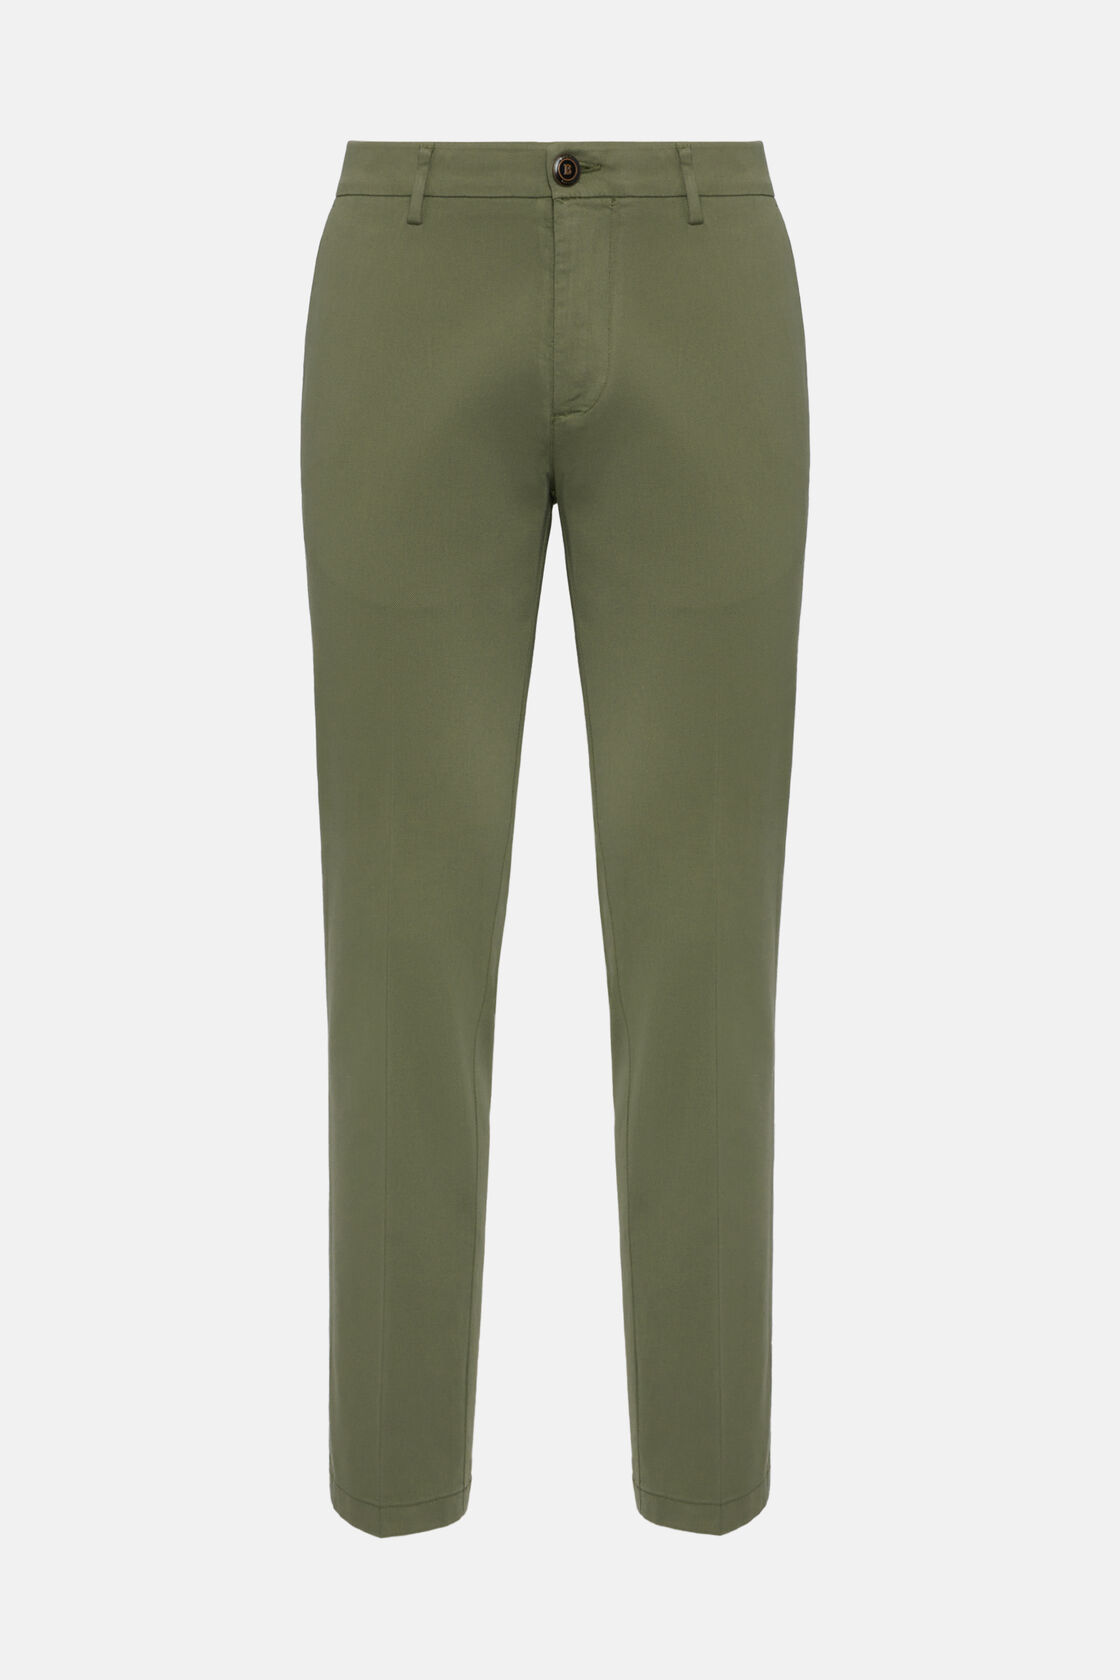 Stretch Cotton/Tencel Trousers, Military Green, hi-res